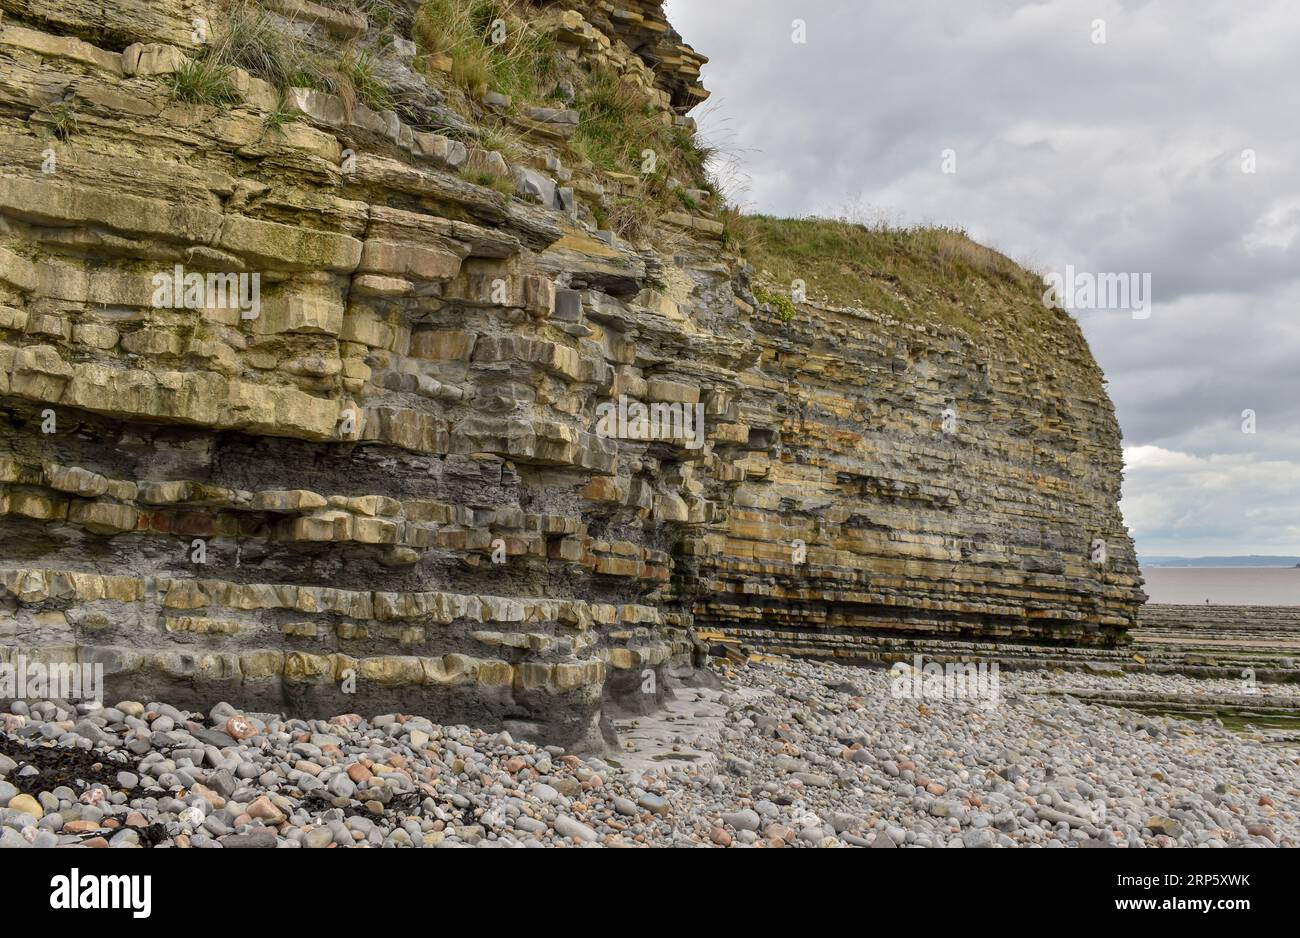 This cliff face on a welsh beach shows what the effects of coastal  erosion and weather can do over time to the layers of rock supporting it. Stock Photo